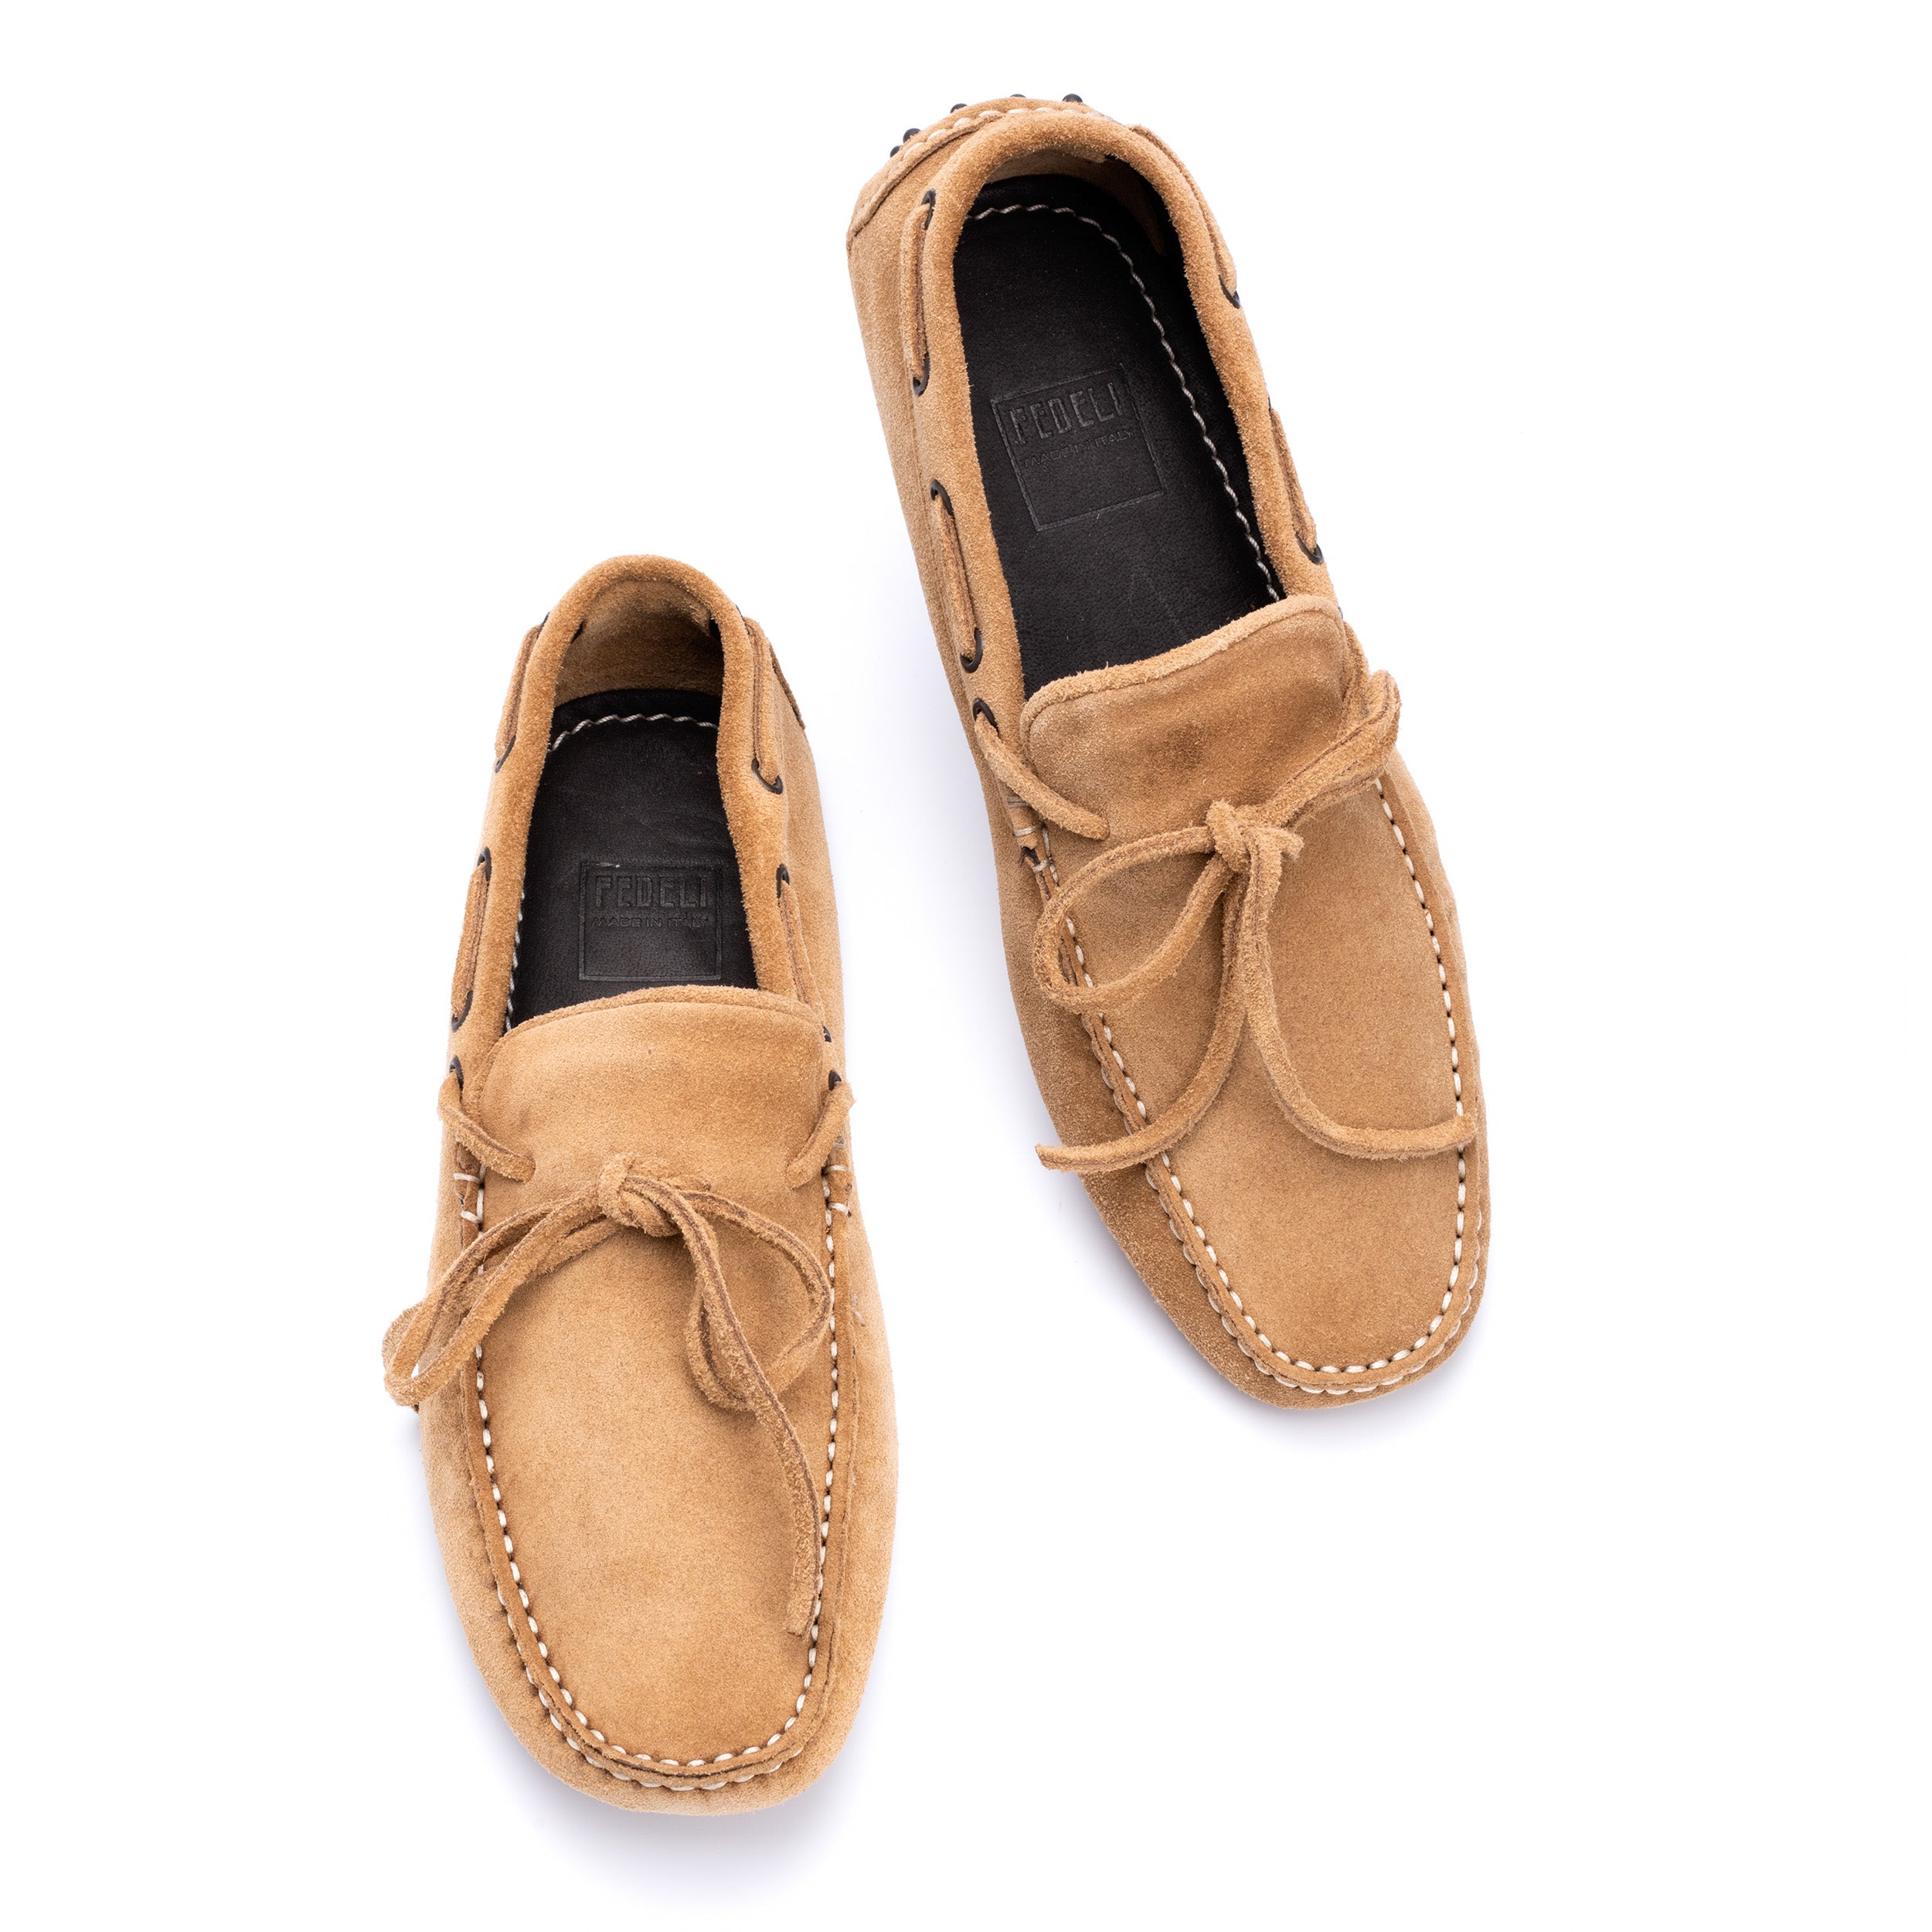 FEDELI "Rally" Camel Brown Suede Loafers Driving Car Shoes Moccasins 40.5 NEW 7. FEDELI